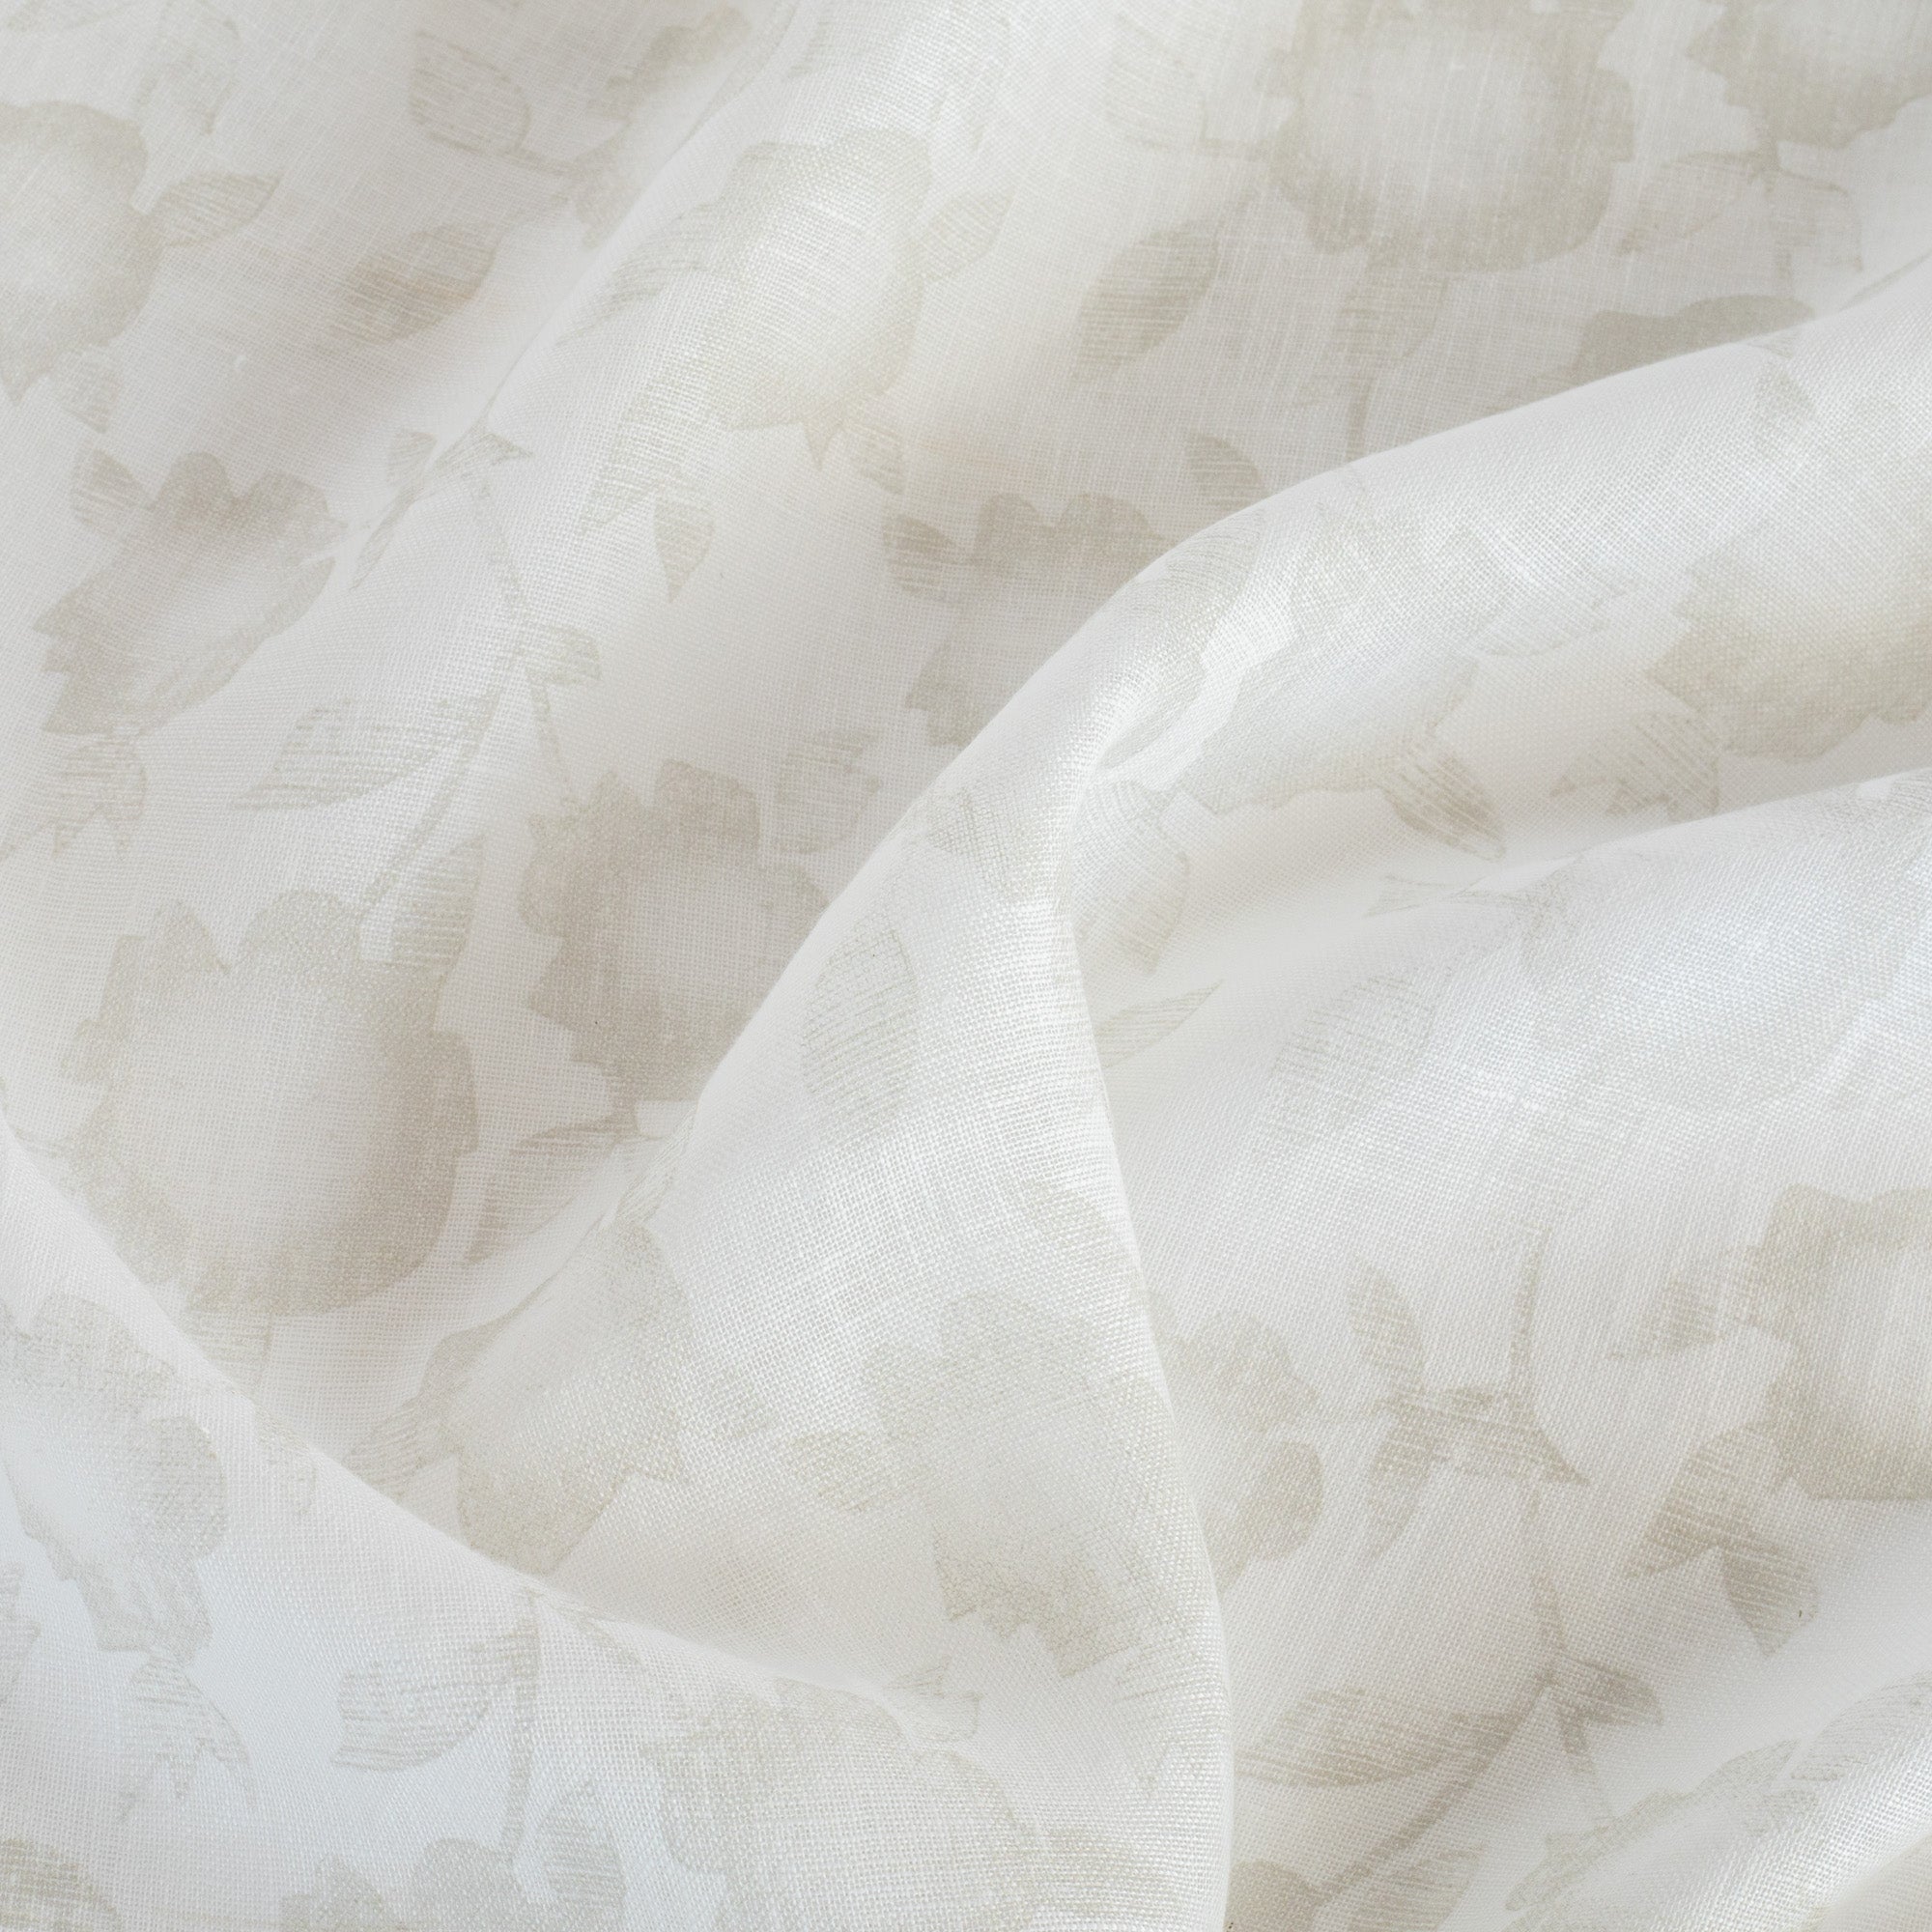 Esmee Flax, a soft white floral print linen sheer drapery fabric from Tonic Living